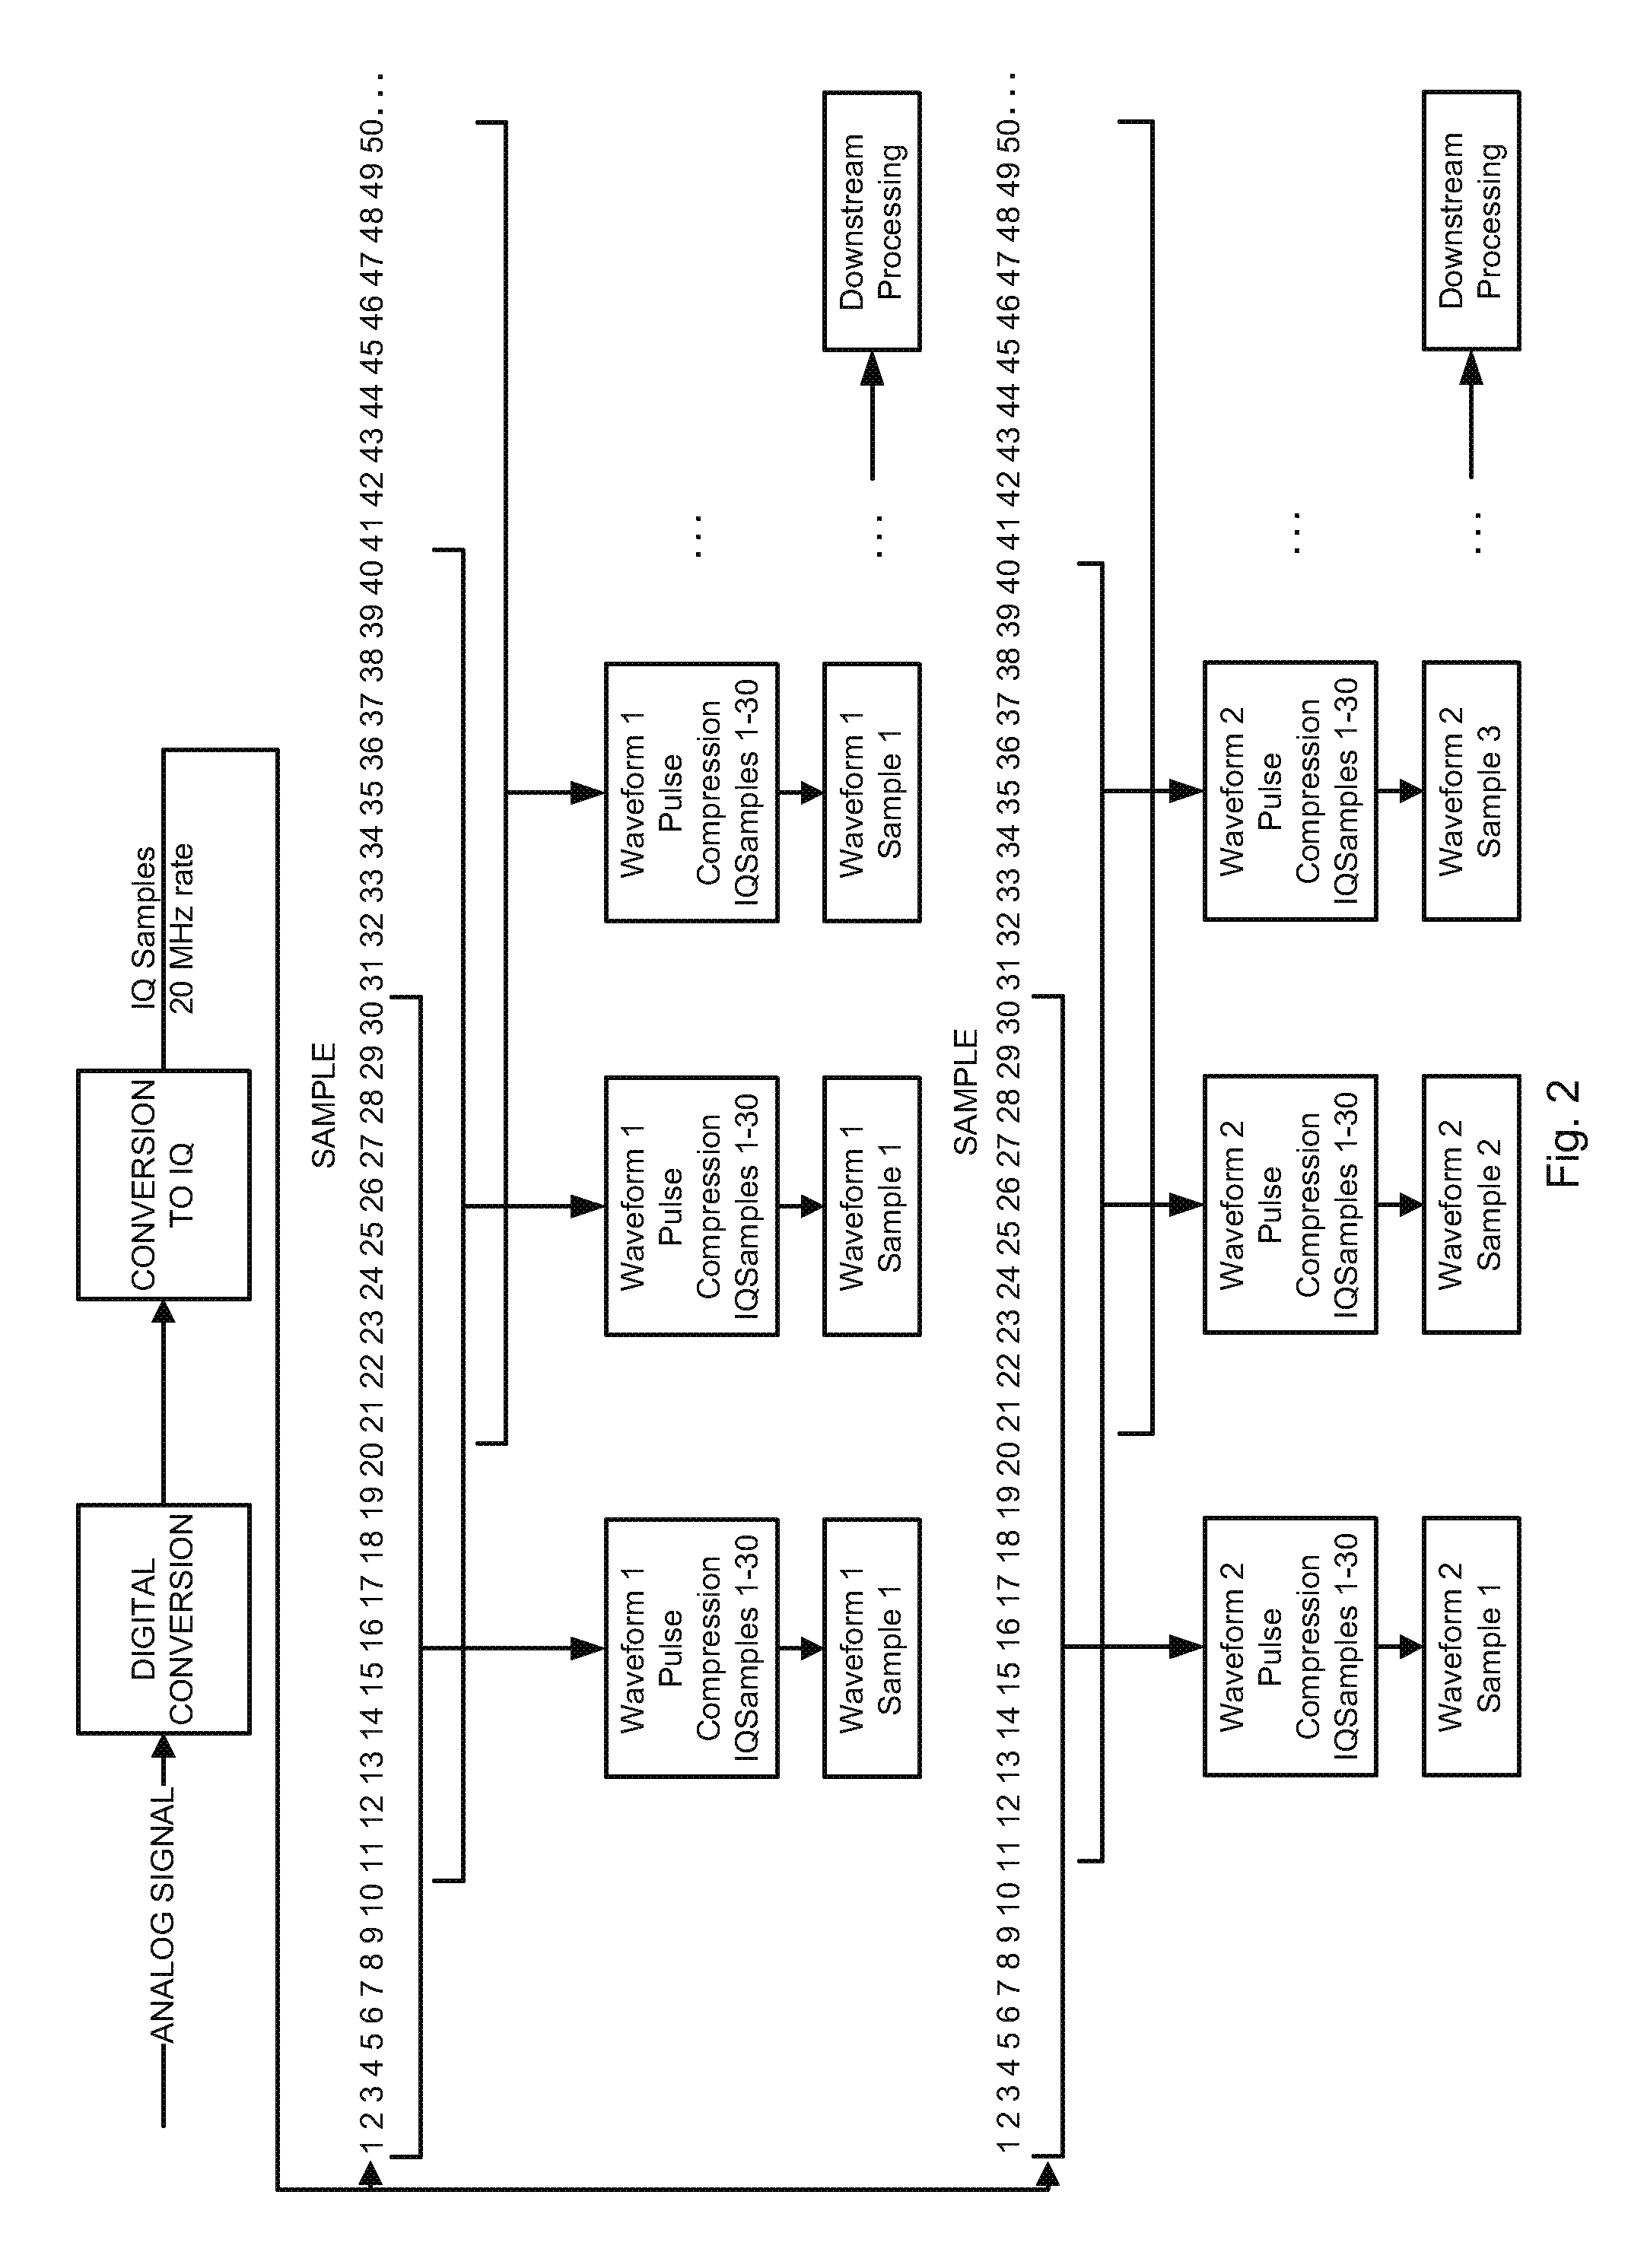 Simultaneous multi-frequency signal processing method